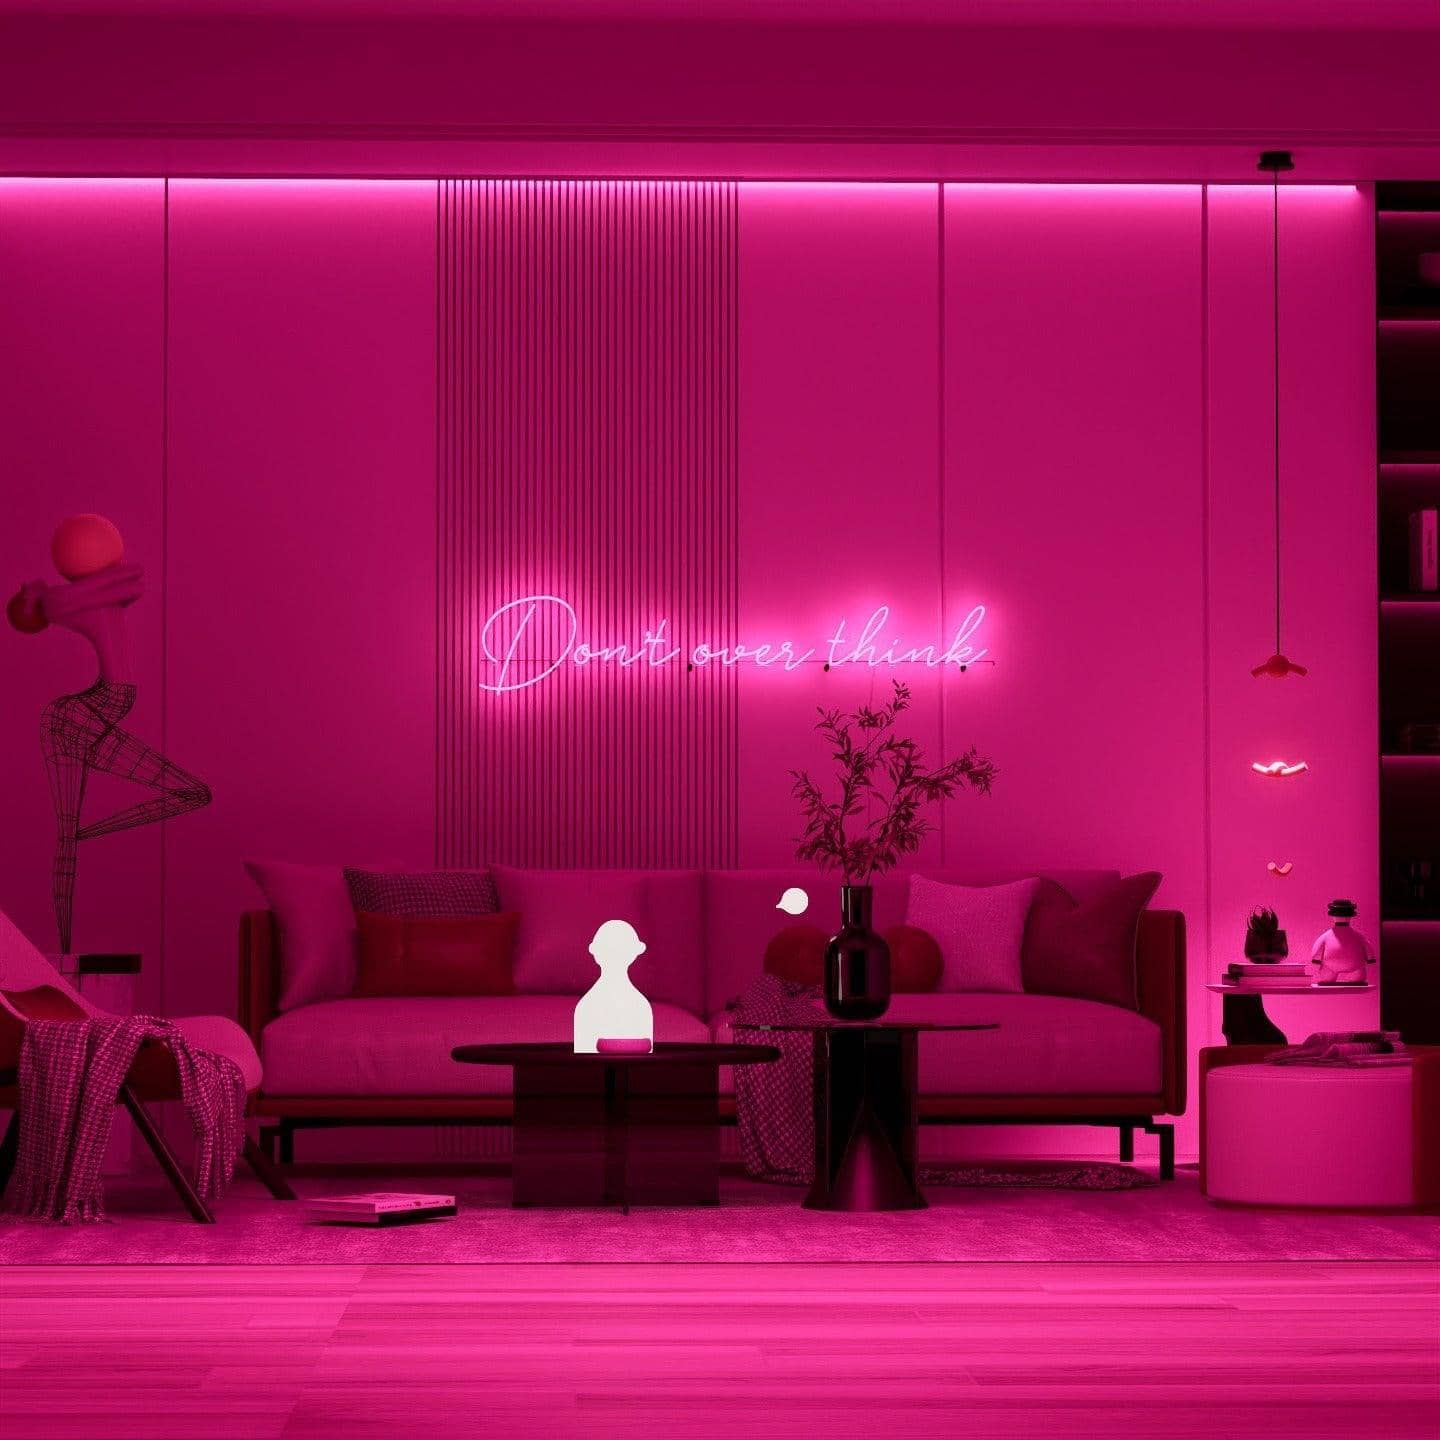 light-up-pink-neon-lights-hanging-on-the-wall-for-display-at-night-don't-over-think